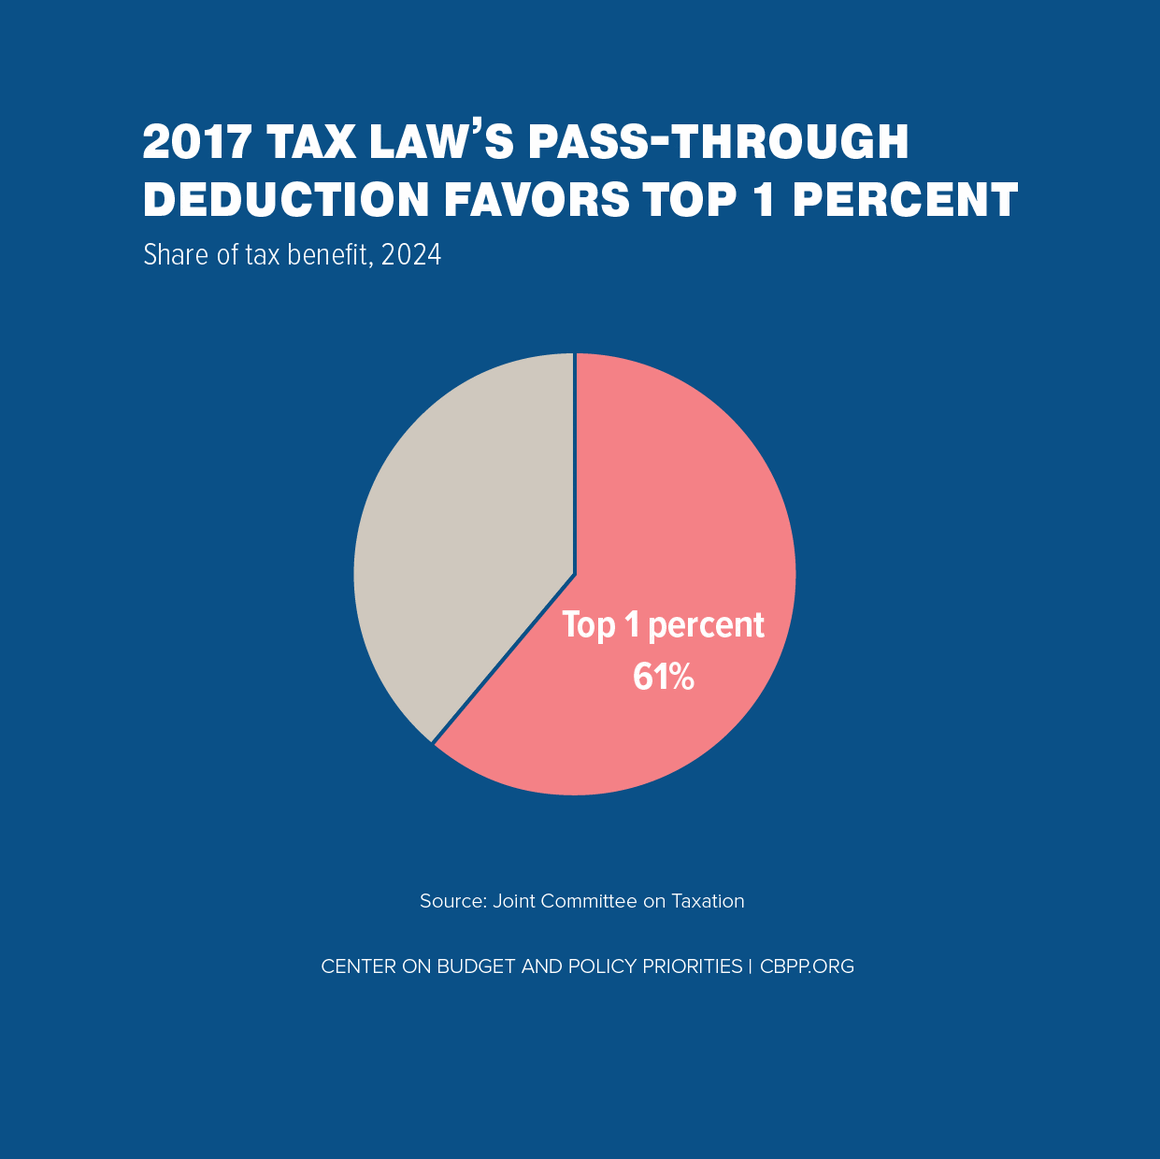 2017 Tax Law's Pass-Through Deduction Favors Top 1 Percent